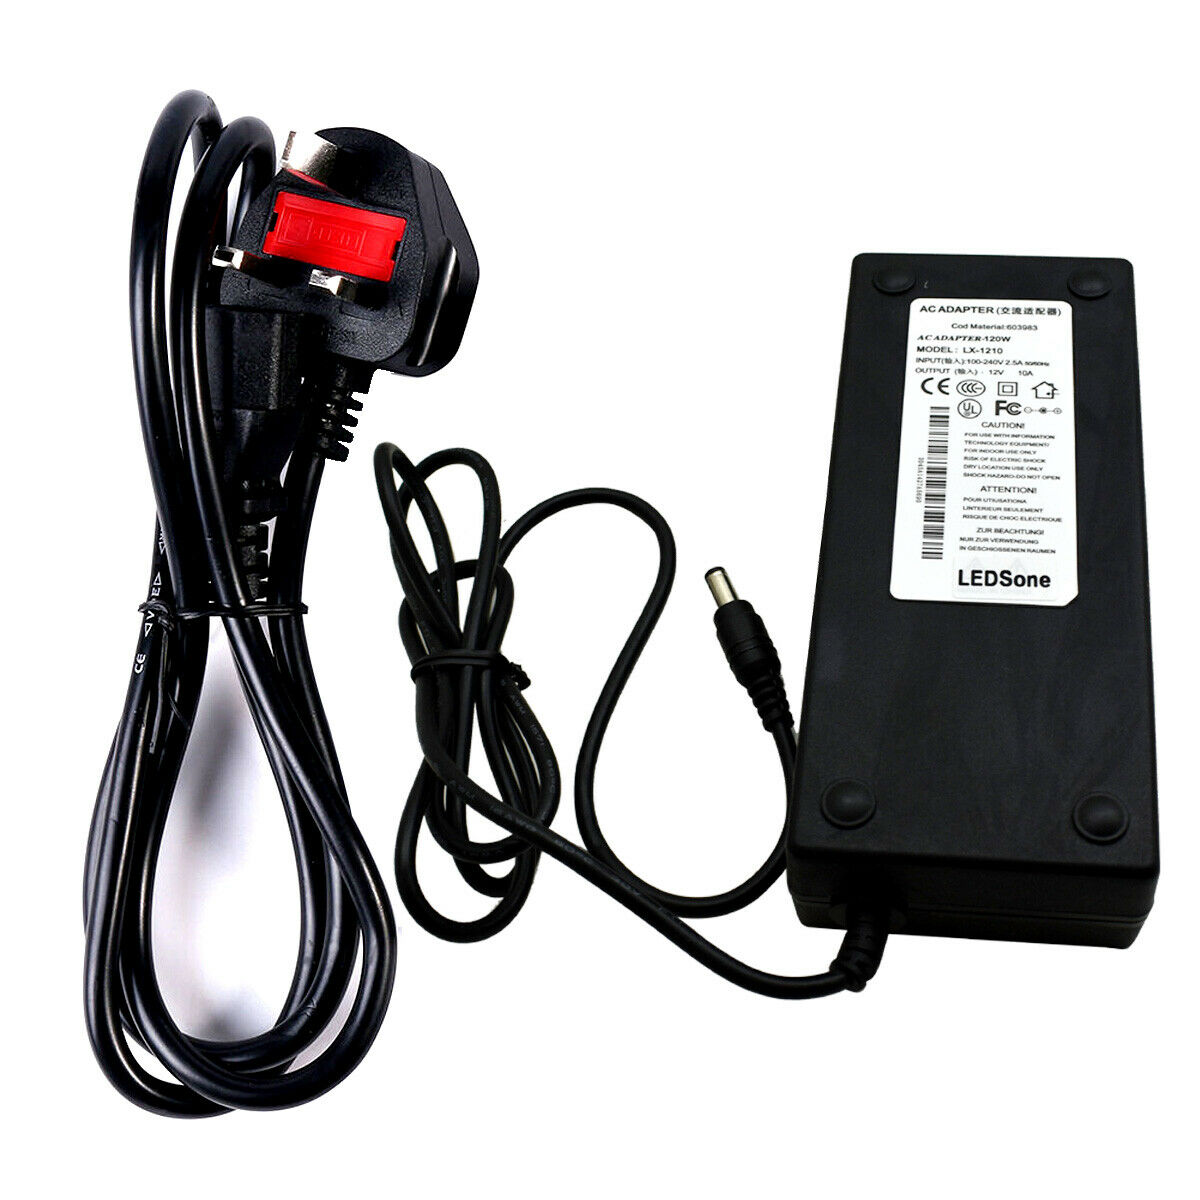 AC DC 12V 10A Power Supply Adapter Charger Transformer for 3528/5050 LED Strip